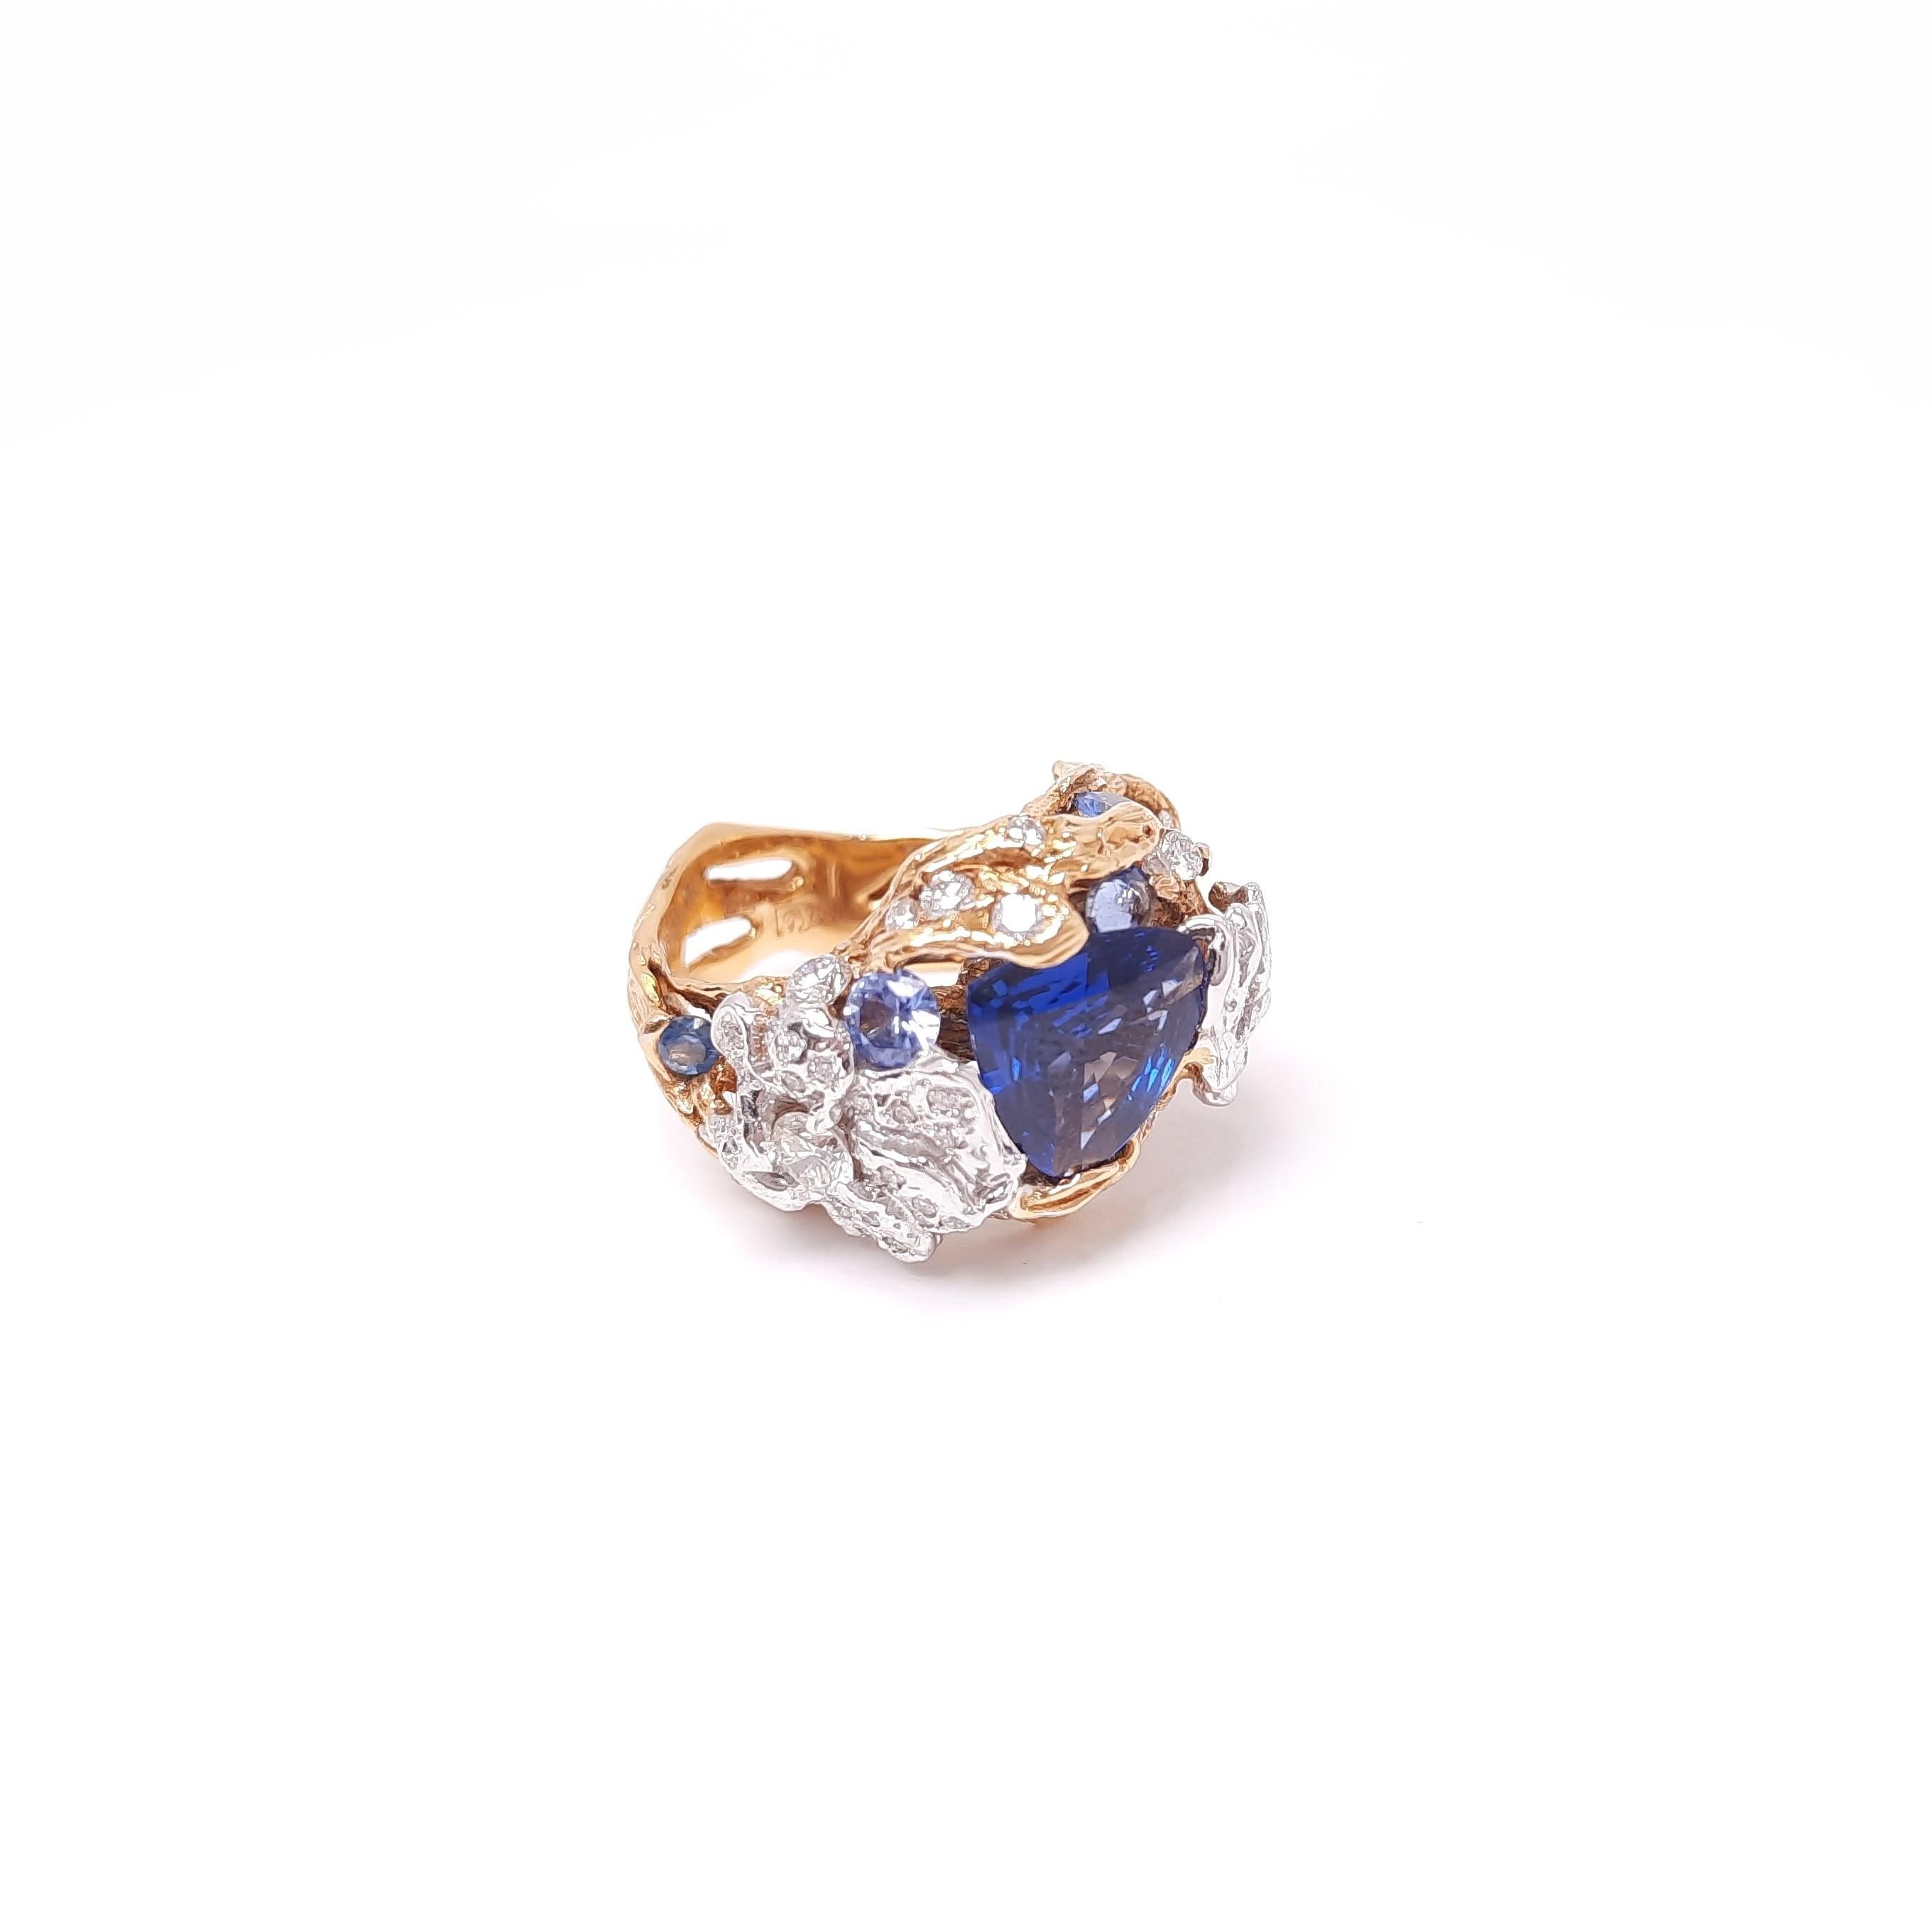 Each creation from MOISEIKIN®  is unique, colourful, and inspirational. 
A fancy cut sapphire is mounted in a handmade design of 18karat gold. Twig-like gold filigree and iris flower petal prong together hold the central sapphire gently, making your